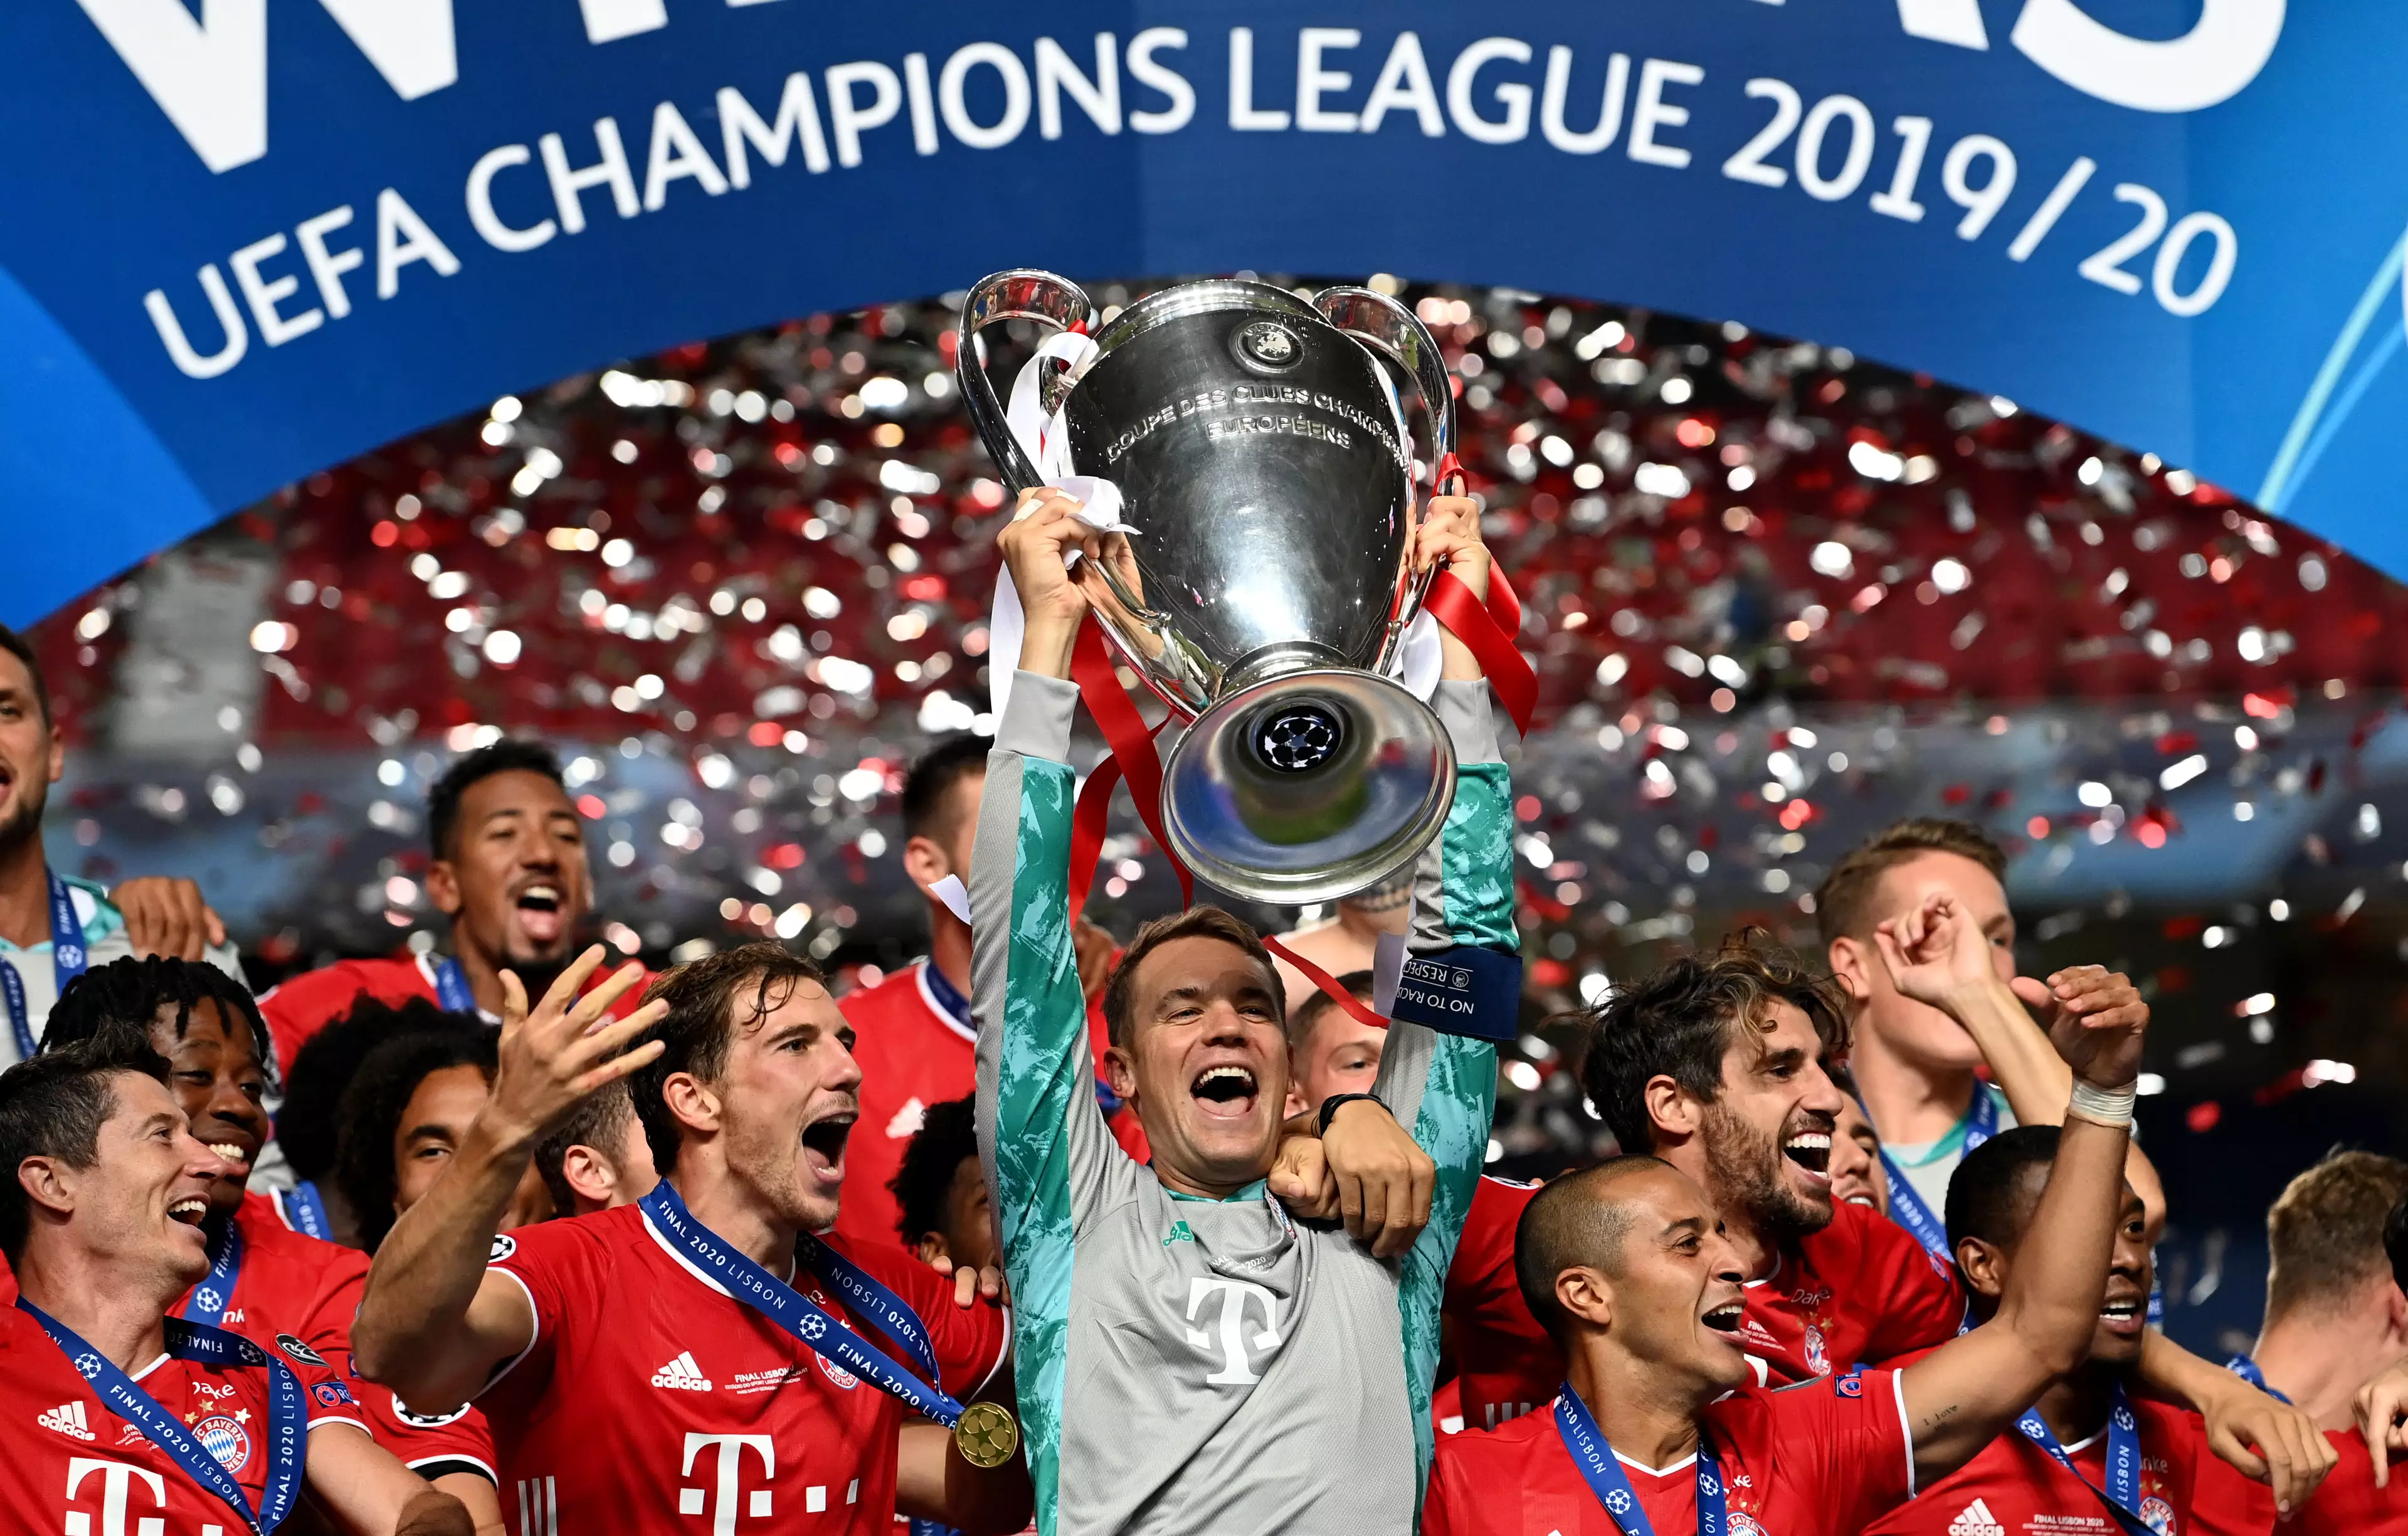 Bayern won the Champions League in August, beating PSG in the final. Image: PA Images